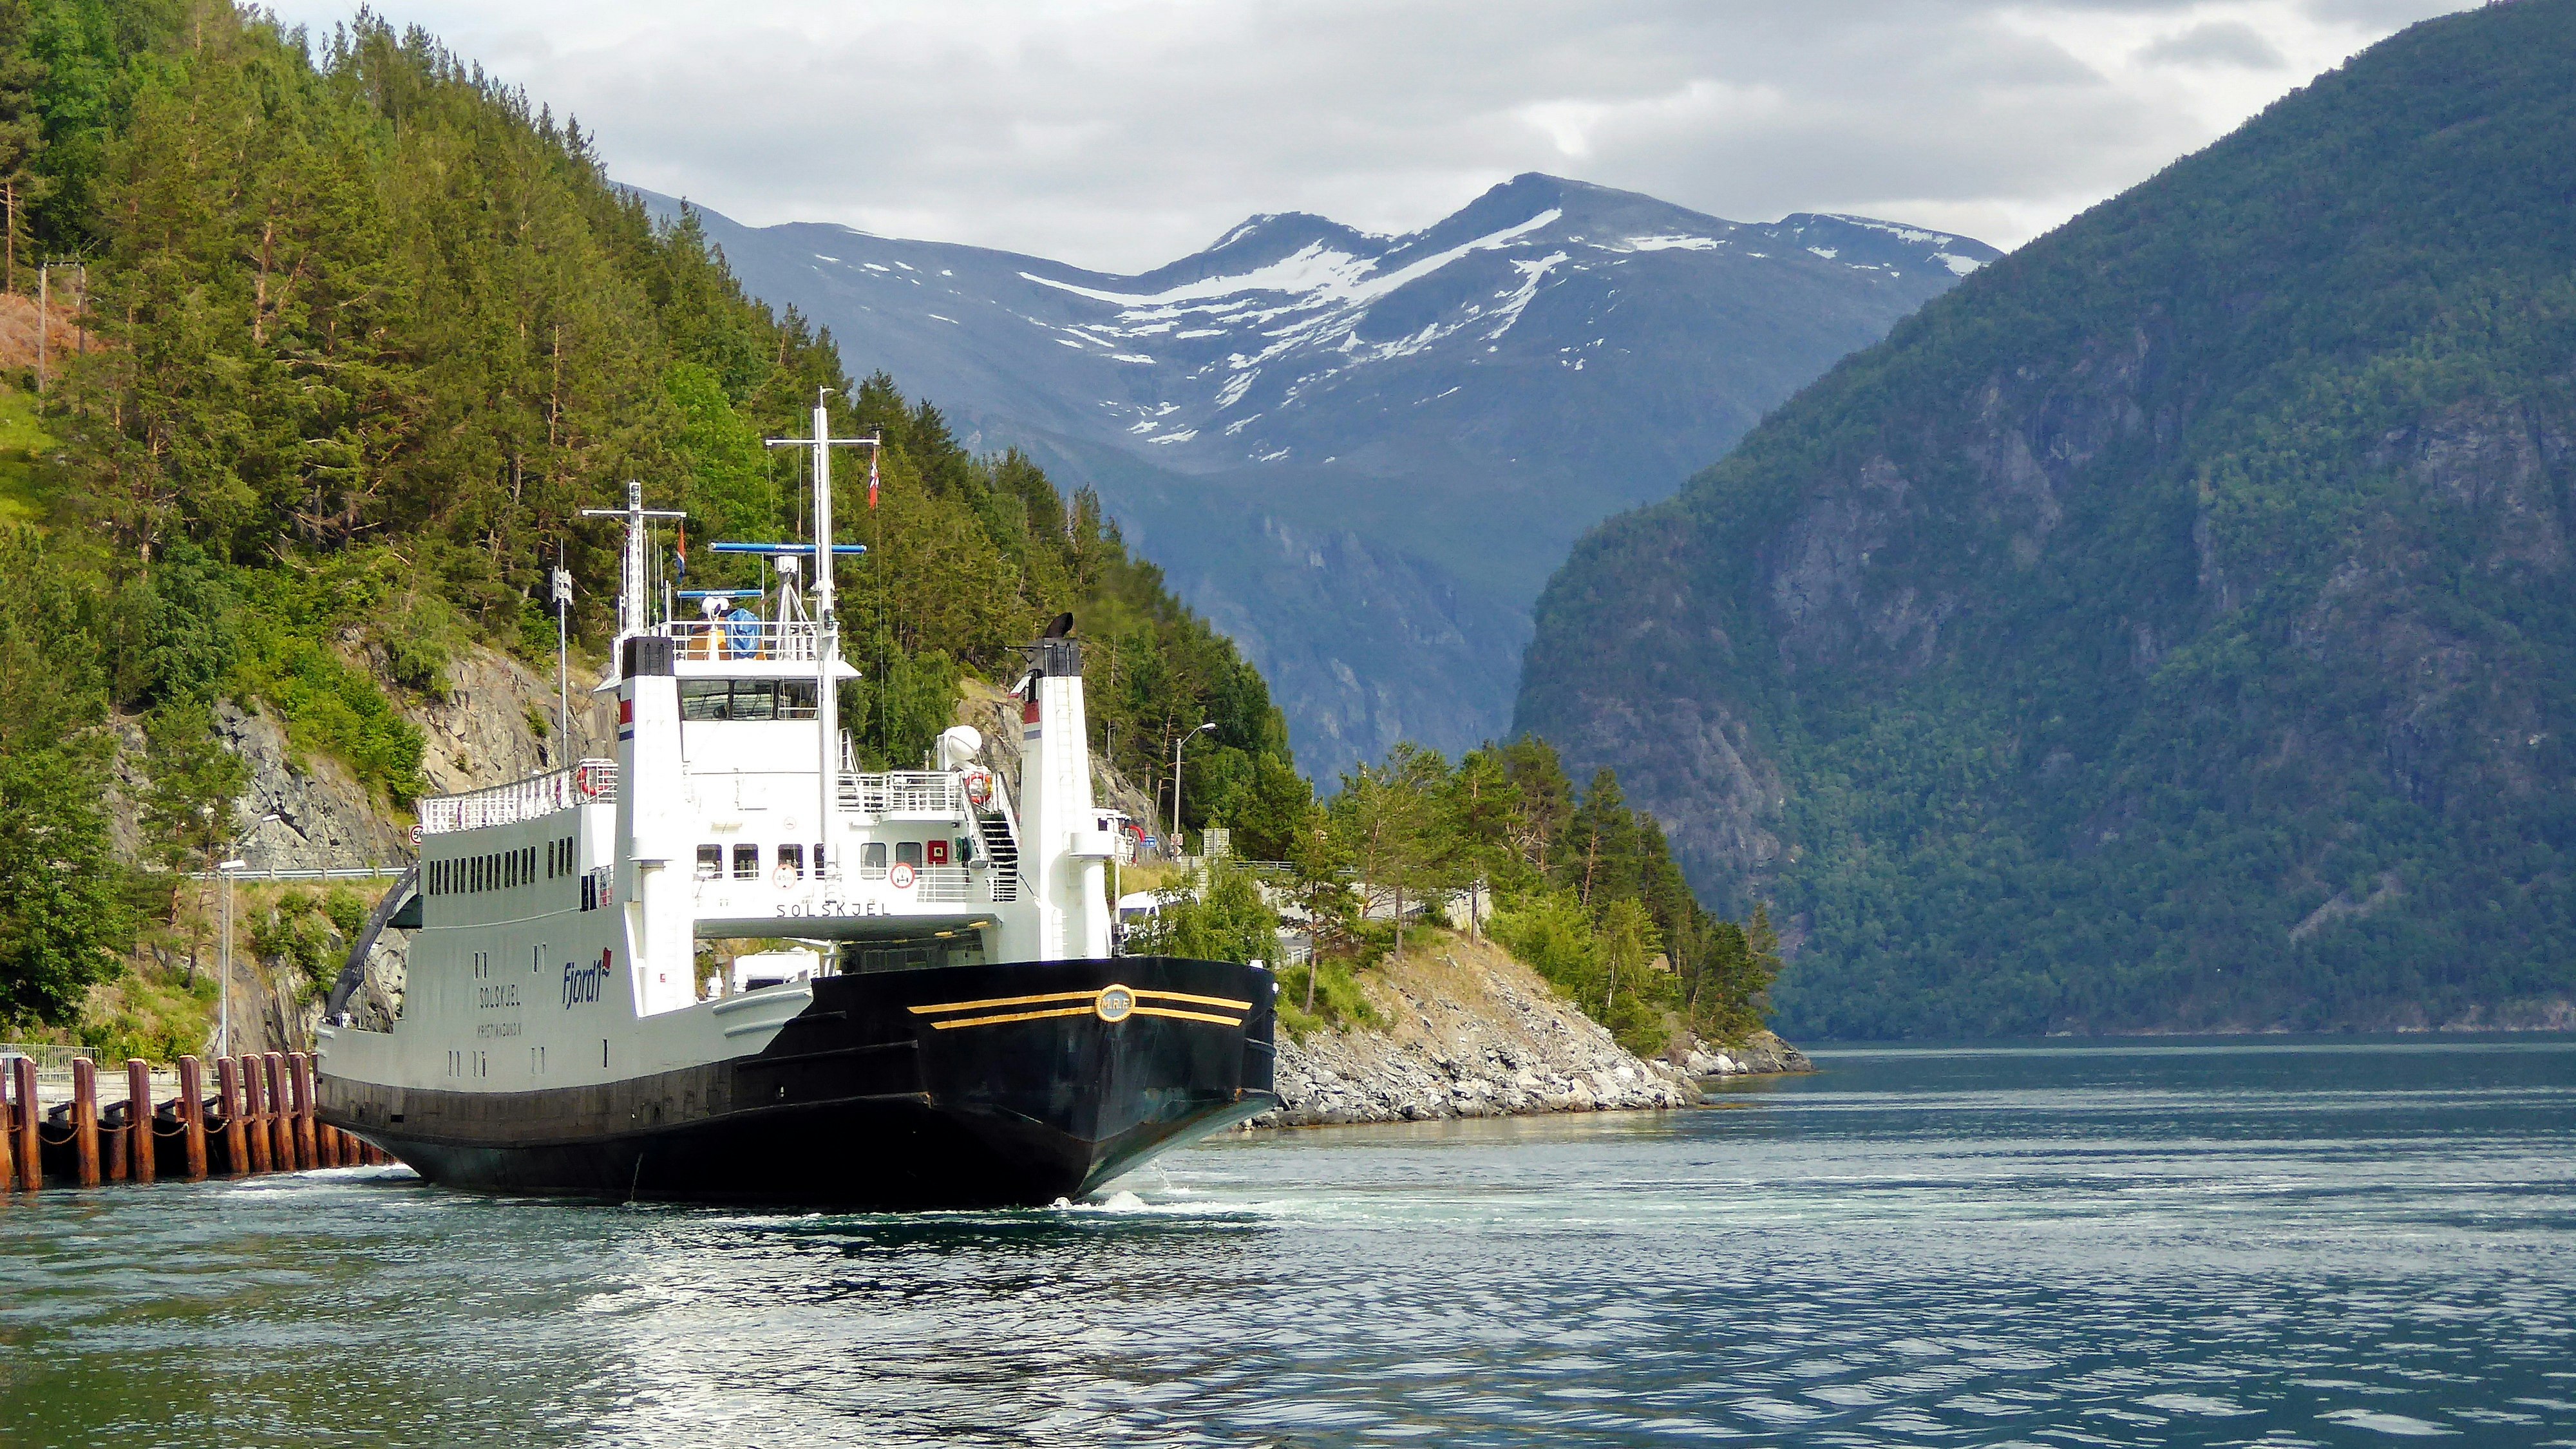 When traveling fjords of Norway even a simple car ferry ride becomes a pleasure. So much to see and explore; here the ferry between Eidsdal and Linge offers nice views into deeper parts of the fjord with mountain scenery.